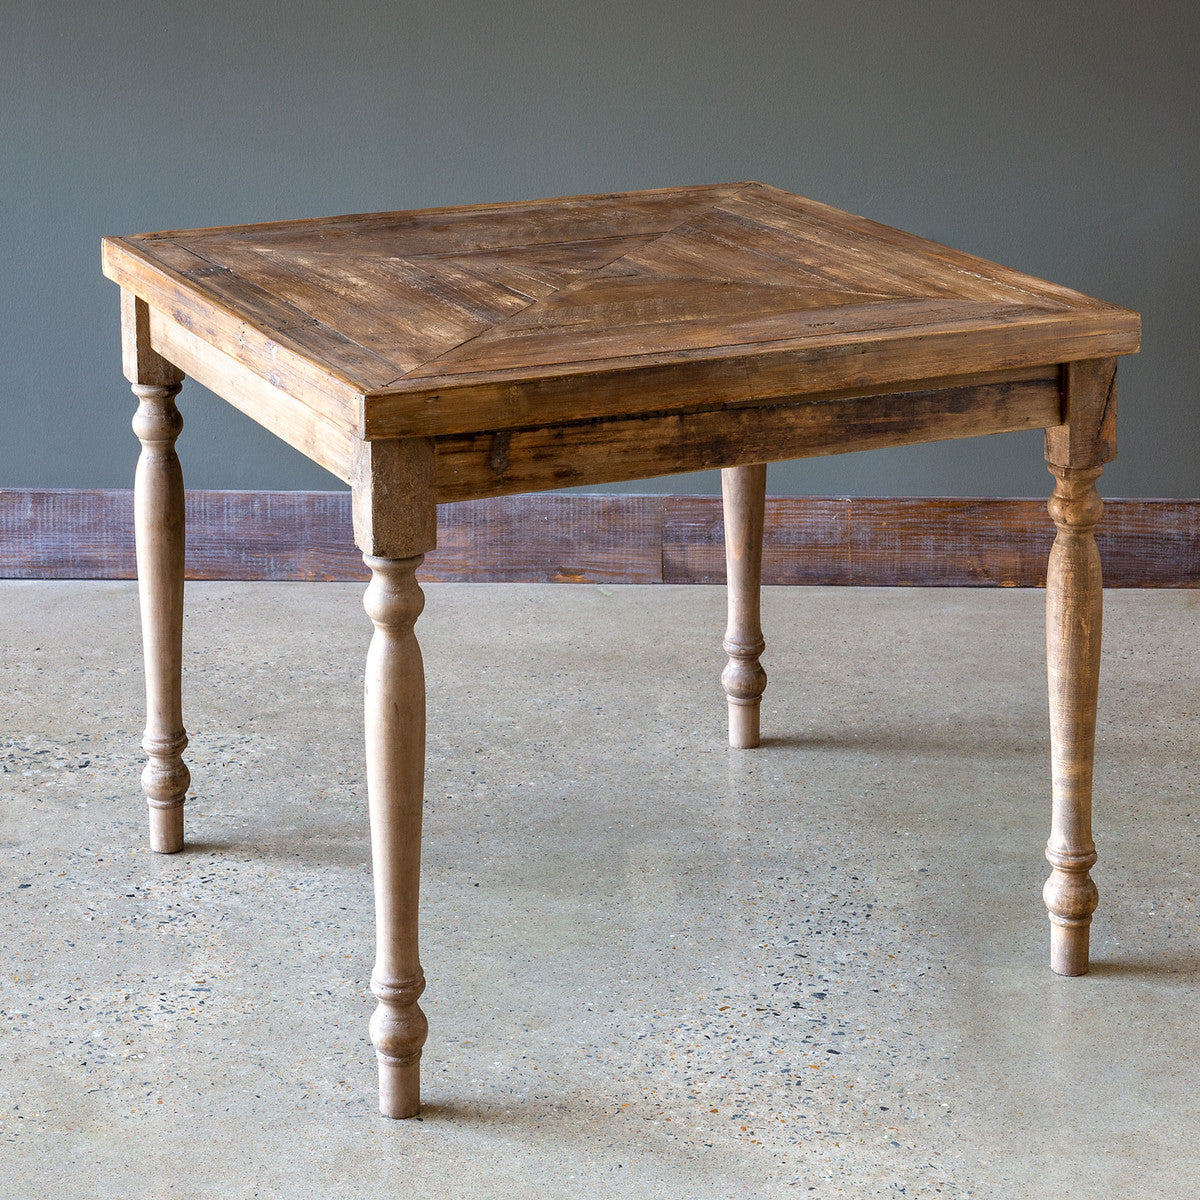 Grainery Square Table-Iron Accents